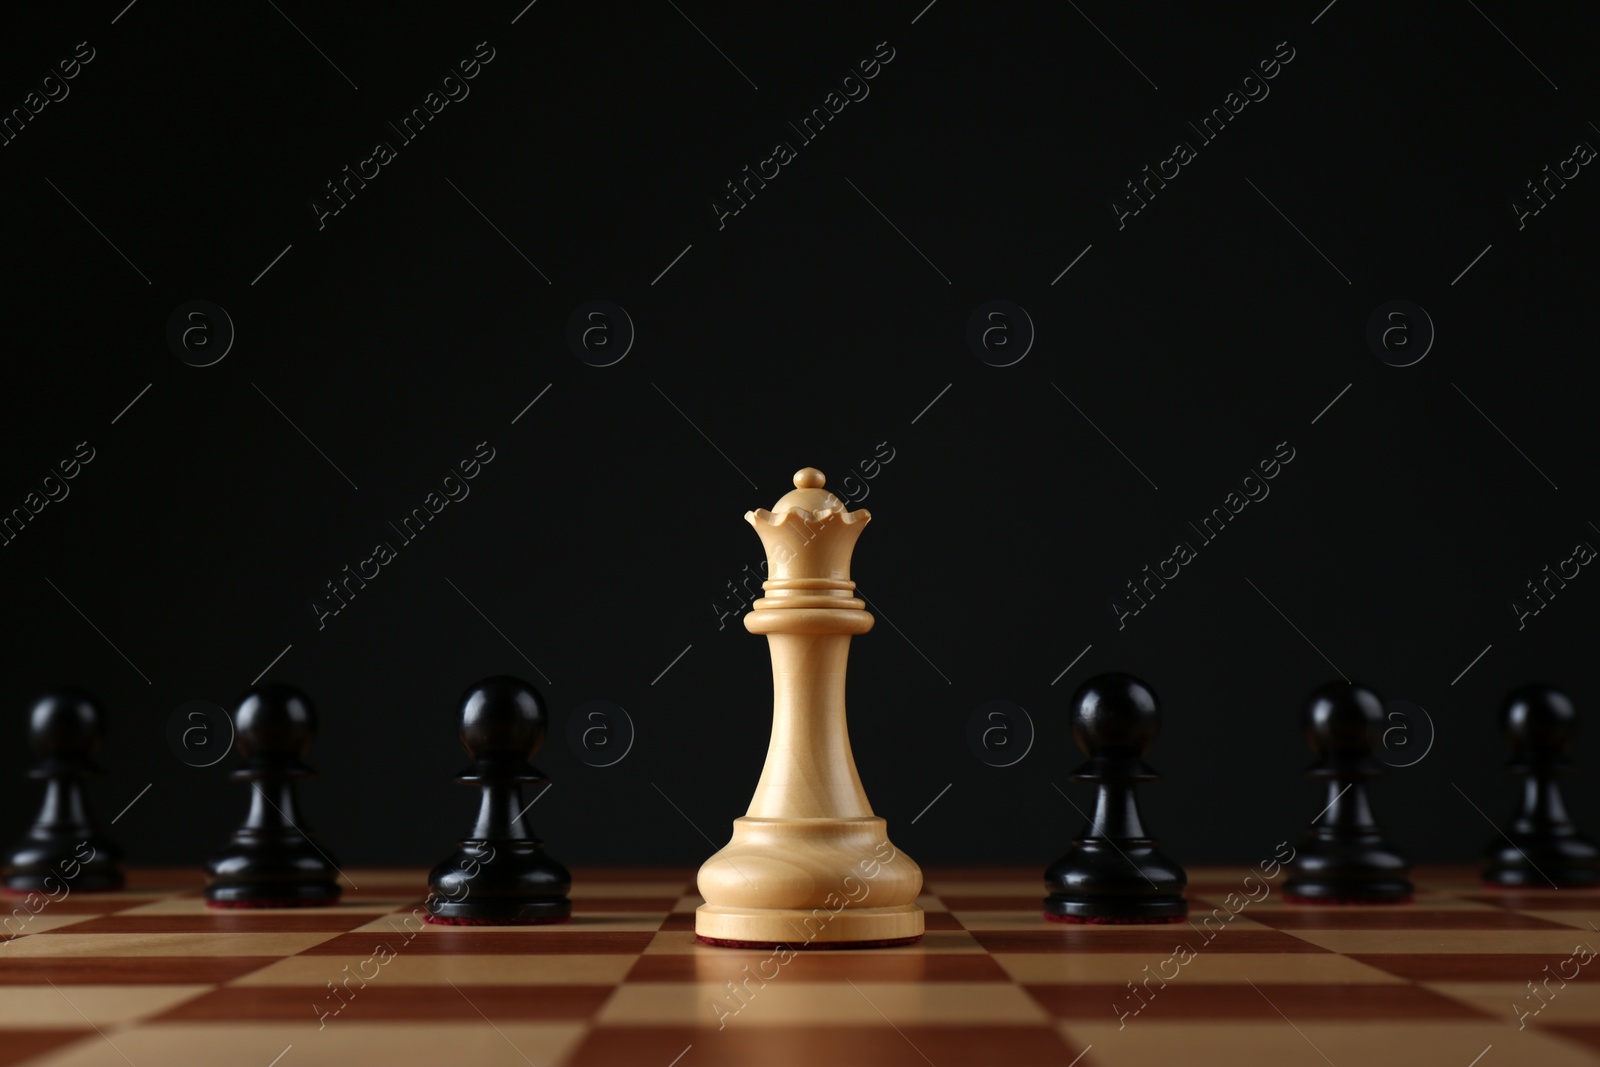 Photo of White queen among black pawns on wooden chess board against dark background